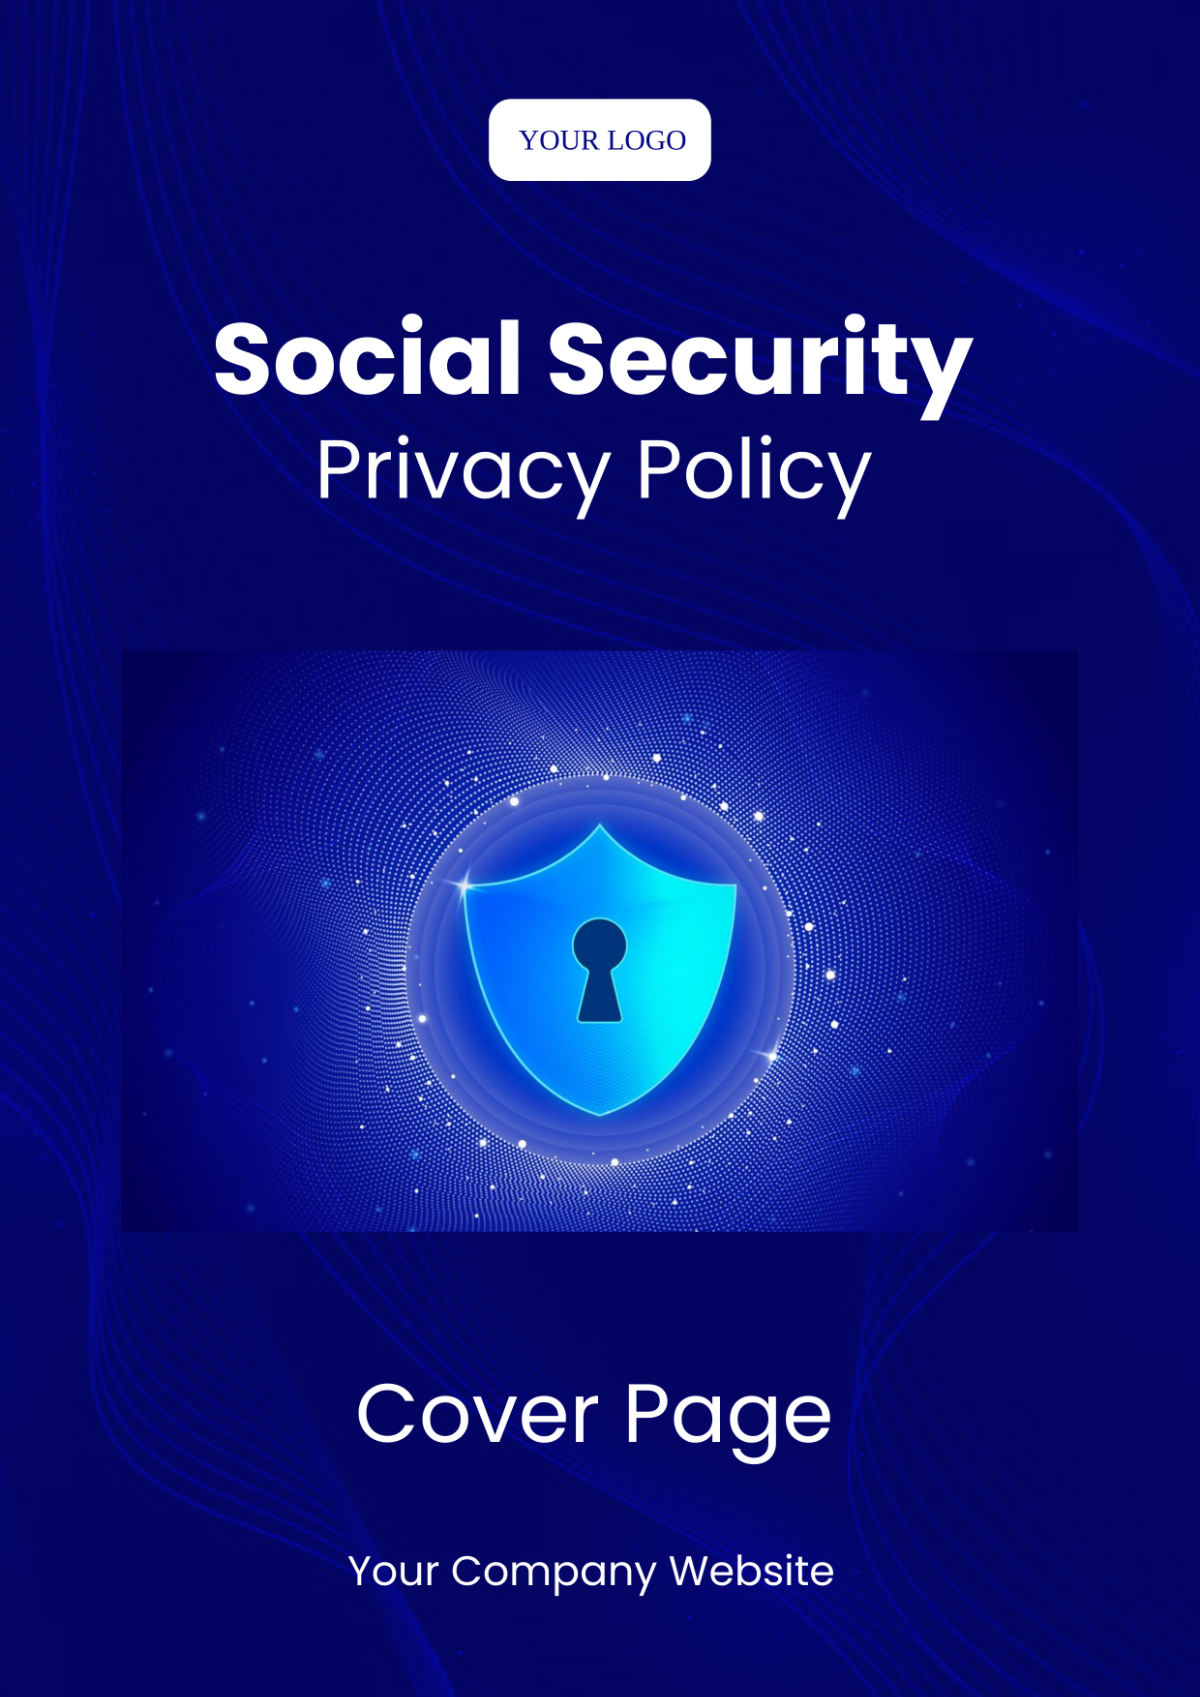 Social Security Privacy Policy Cover Page